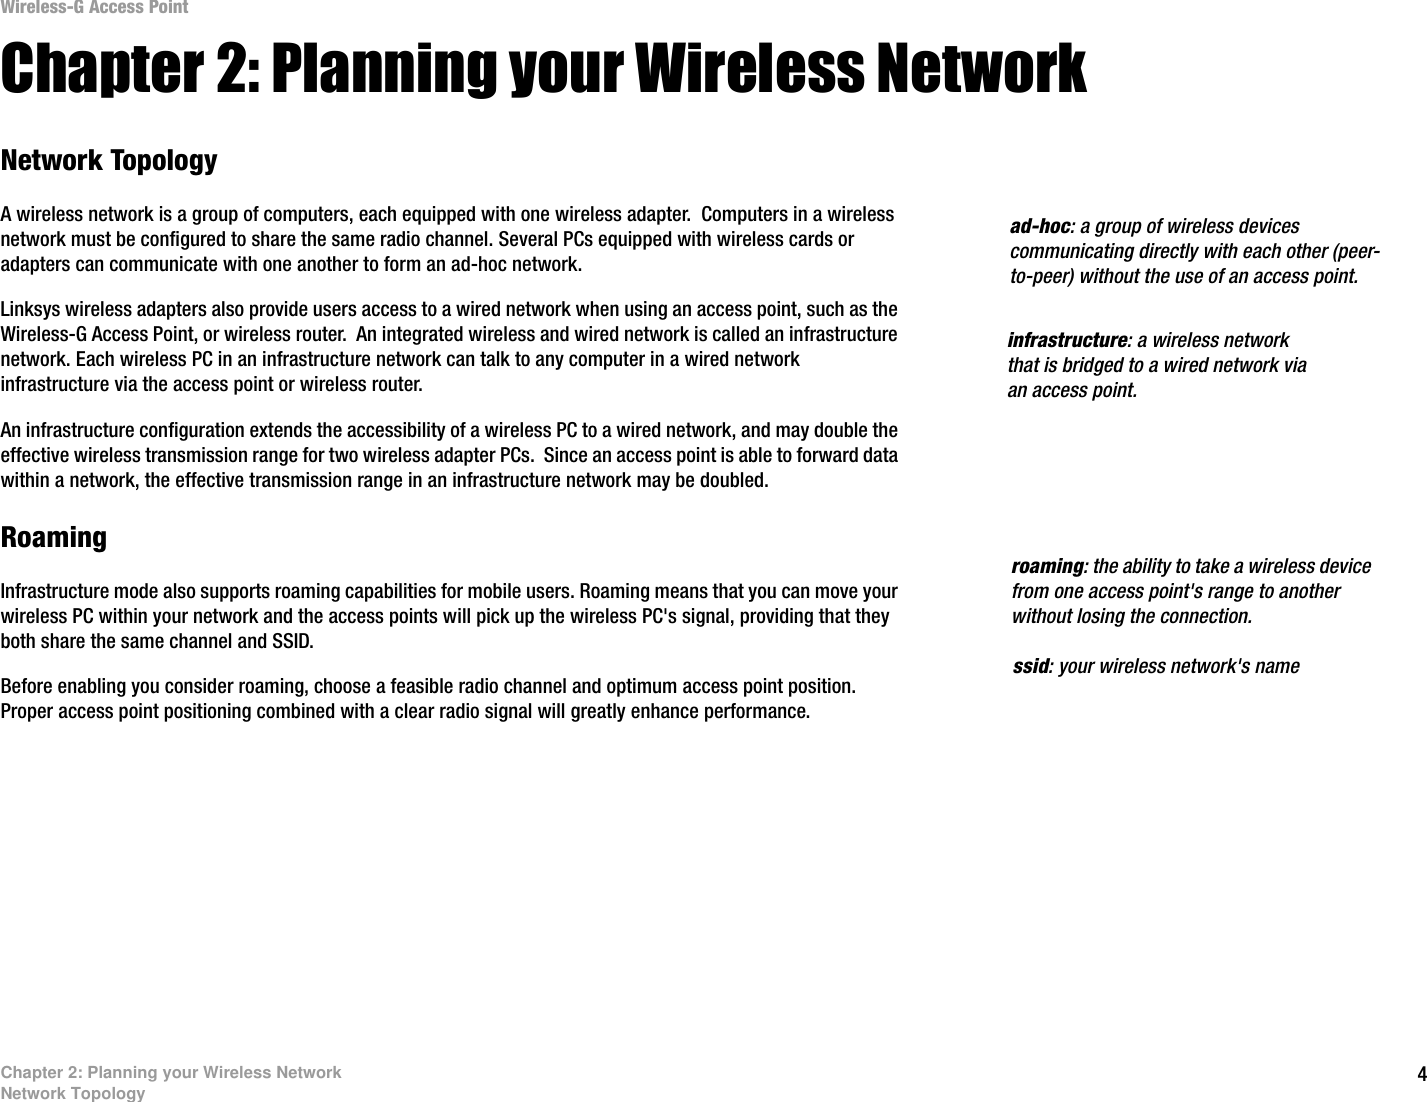 4Chapter 2: Planning your Wireless NetworkNetwork TopologyWireless-G Access PointChapter 2: Planning your Wireless NetworkNetwork TopologyA wireless network is a group of computers, each equipped with one wireless adapter.  Computers in a wireless network must be configured to share the same radio channel. Several PCs equipped with wireless cards or adapters can communicate with one another to form an ad-hoc network.Linksys wireless adapters also provide users access to a wired network when using an access point, such as the Wireless-G Access Point, or wireless router.  An integrated wireless and wired network is called an infrastructure network. Each wireless PC in an infrastructure network can talk to any computer in a wired network infrastructure via the access point or wireless router.An infrastructure configuration extends the accessibility of a wireless PC to a wired network, and may double the effective wireless transmission range for two wireless adapter PCs.  Since an access point is able to forward data within a network, the effective transmission range in an infrastructure network may be doubled.RoamingInfrastructure mode also supports roaming capabilities for mobile users. Roaming means that you can move your wireless PC within your network and the access points will pick up the wireless PC&apos;s signal, providing that they both share the same channel and SSID.Before enabling you consider roaming, choose a feasible radio channel and optimum access point position. Proper access point positioning combined with a clear radio signal will greatly enhance performance. infrastructure: a wireless network that is bridged to a wired network via an access point.ad-hoc: a group of wireless devices communicating directly with each other (peer-to-peer) without the use of an access point.roaming: the ability to take a wireless device from one access point&apos;s range to another without losing the connection.ssid: your wireless network&apos;s name